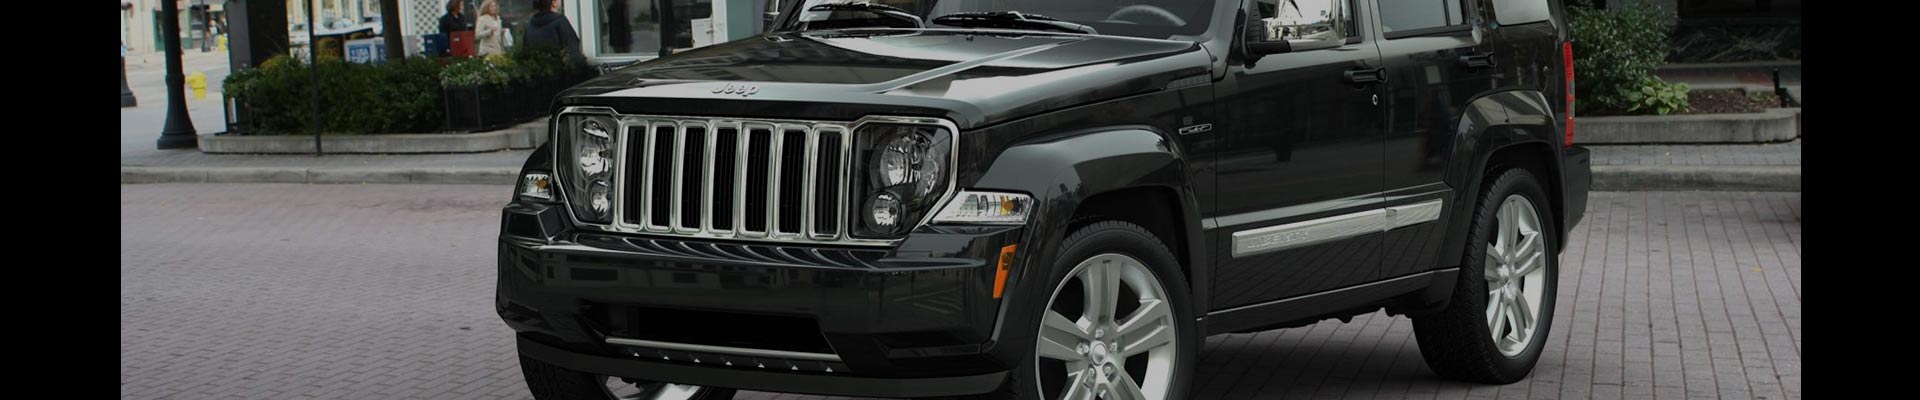 Shop Replacement and OEM 2006 Jeep Liberty Parts with Discounted Price on the Net